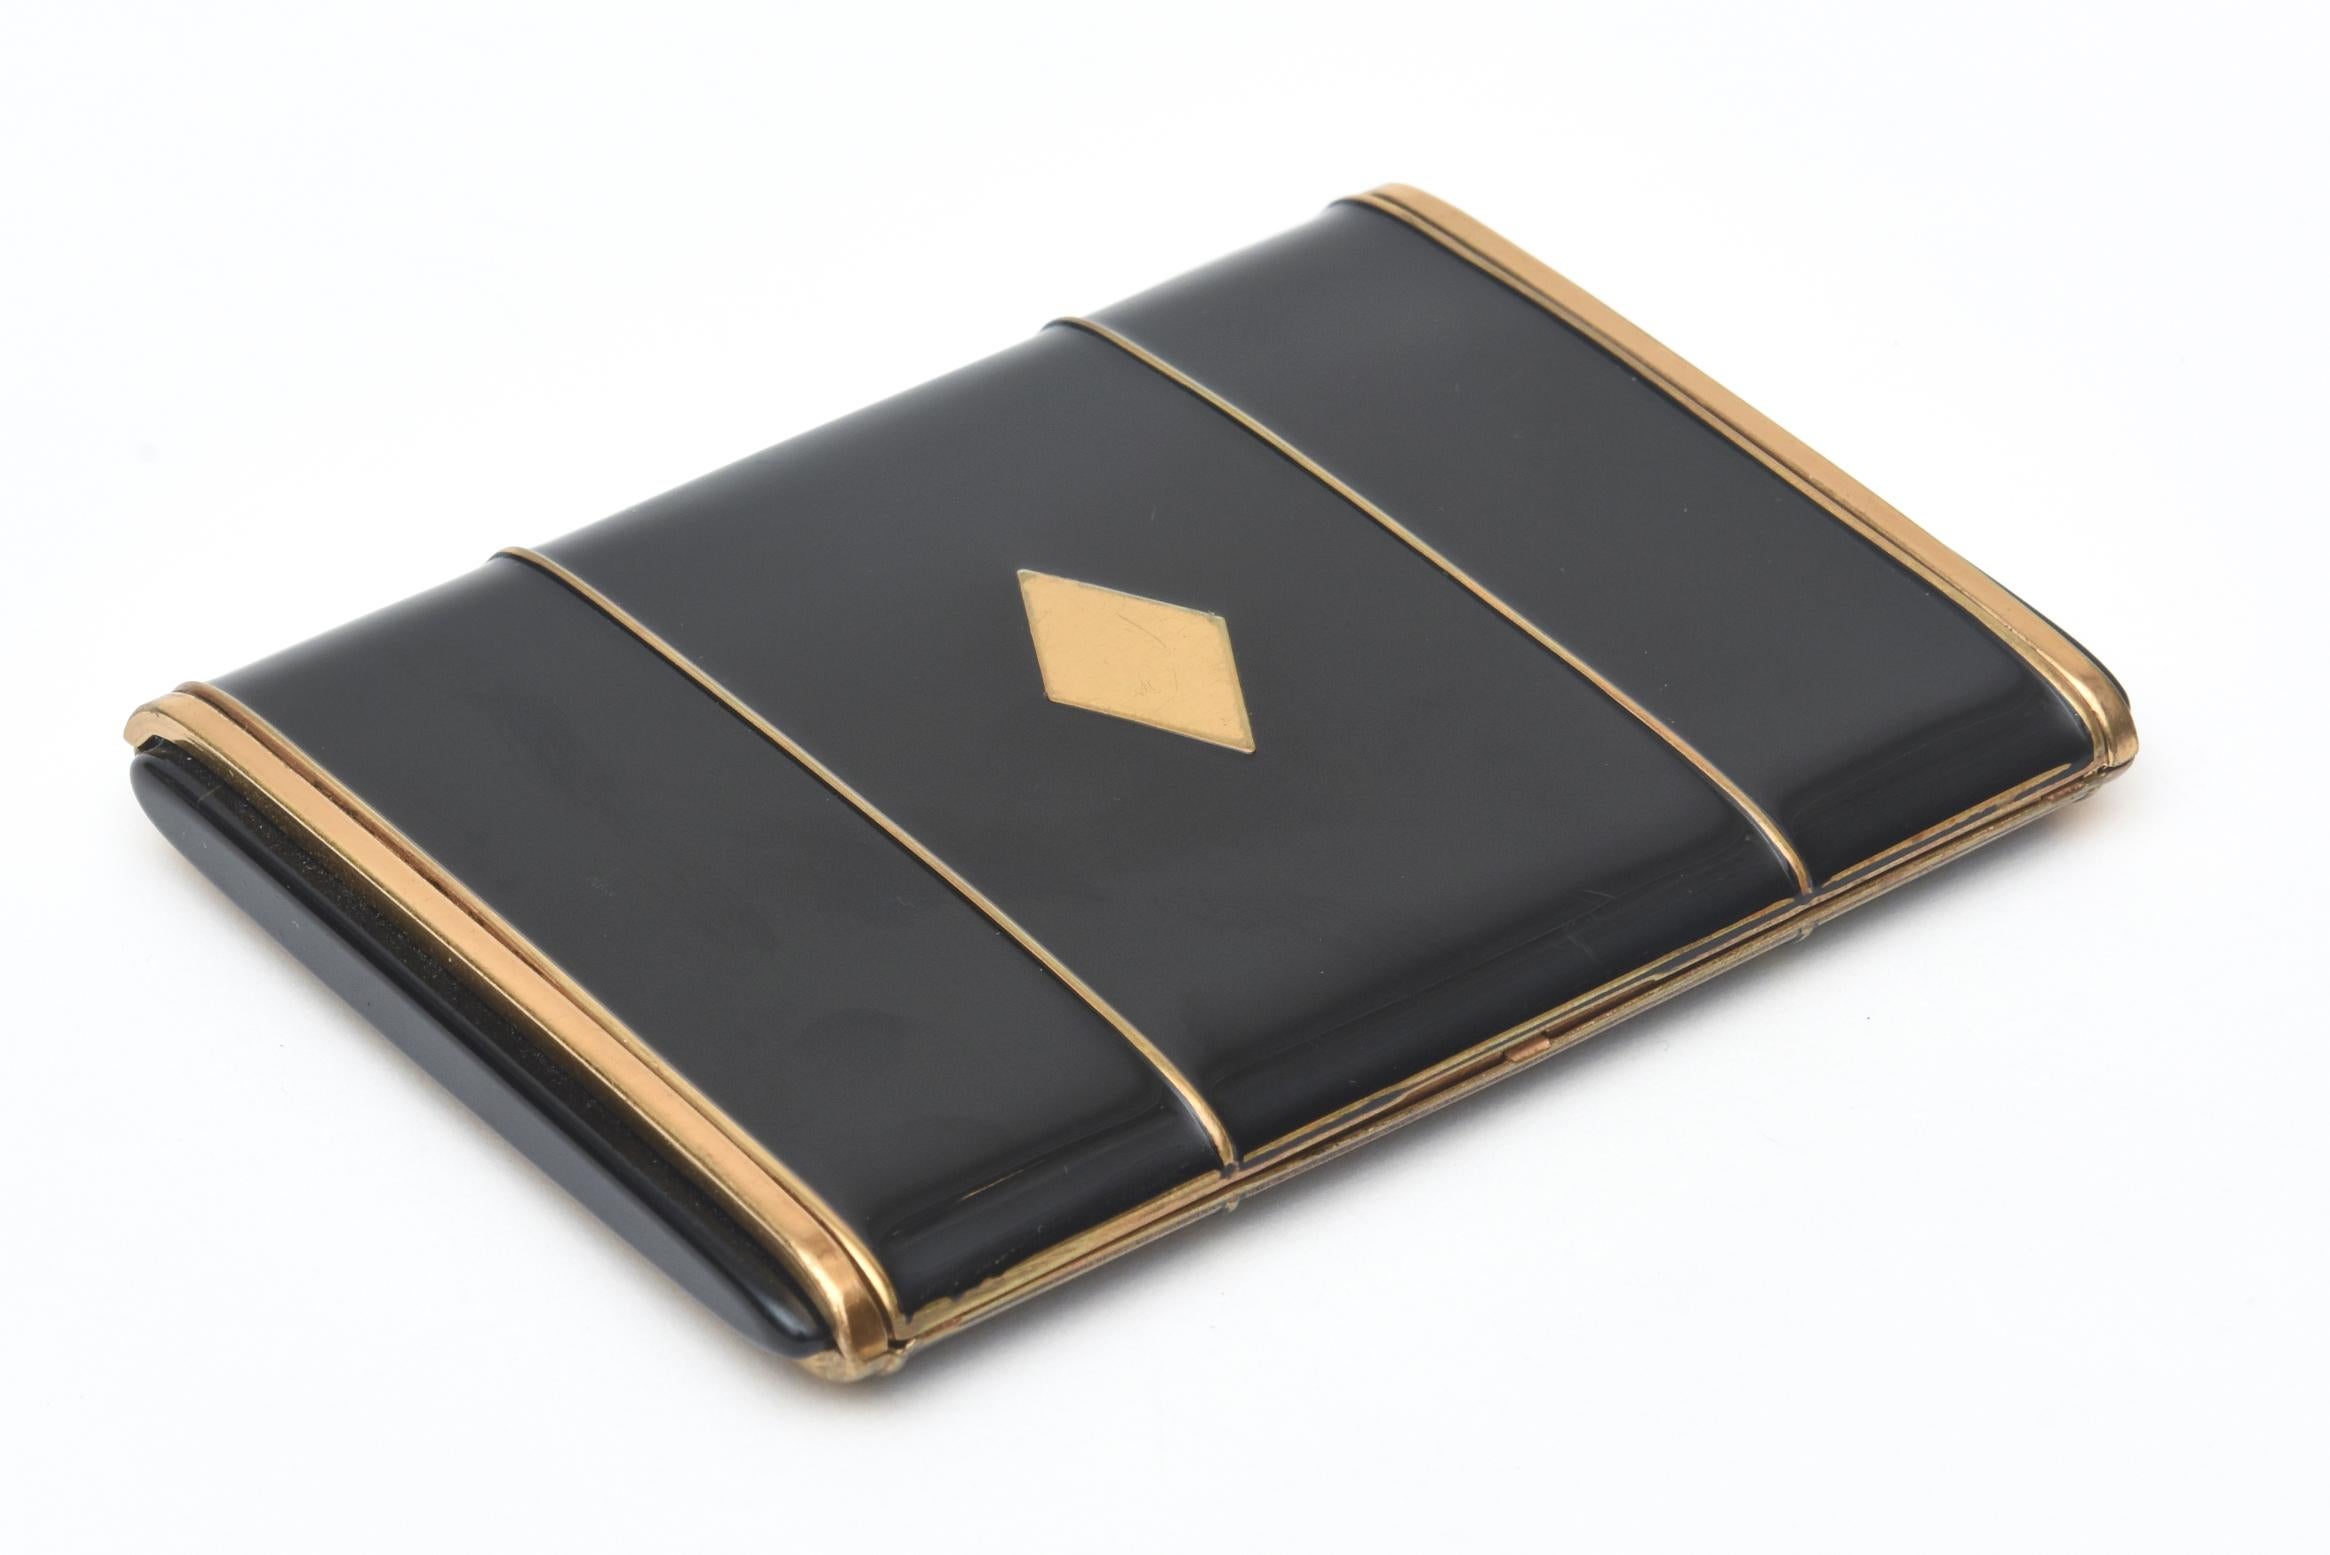 This stunning period art deco card case was once a cigarette case from the era. it is black enamel and gold metal with a diamond center form. It should be kept in a jewelers bag in one's handbag so there are not more scratches on it. It is